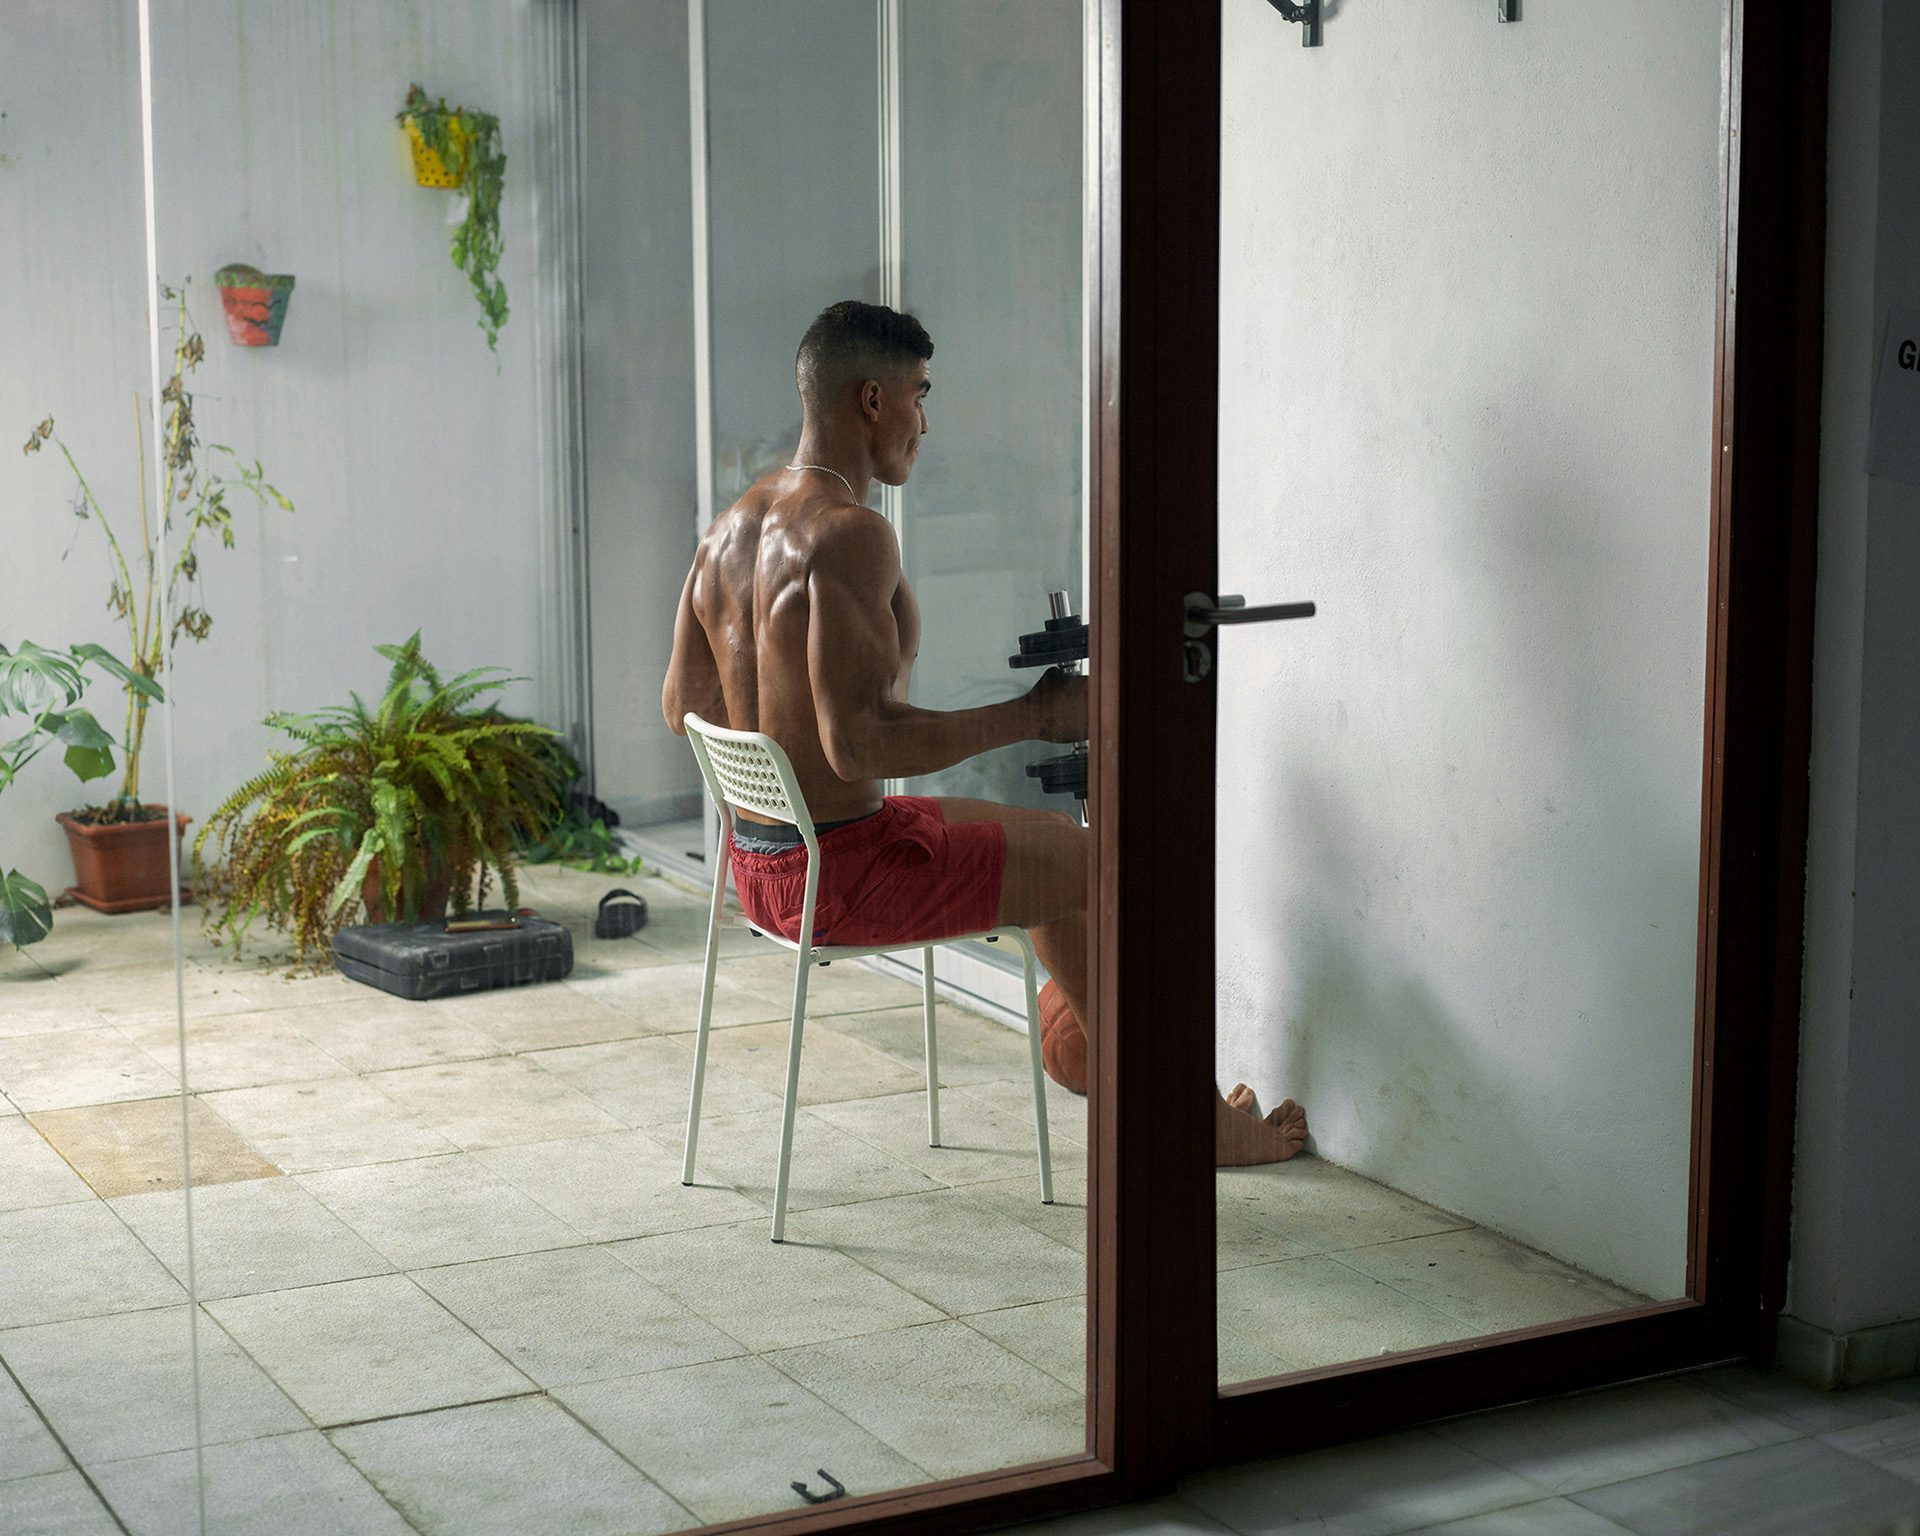 Photograph from Dialect by Felipe Romero Beltran showing a young person, who is wearing red shorts, holding arm weights while sat down on a garden chair, as soon through a glass window and door